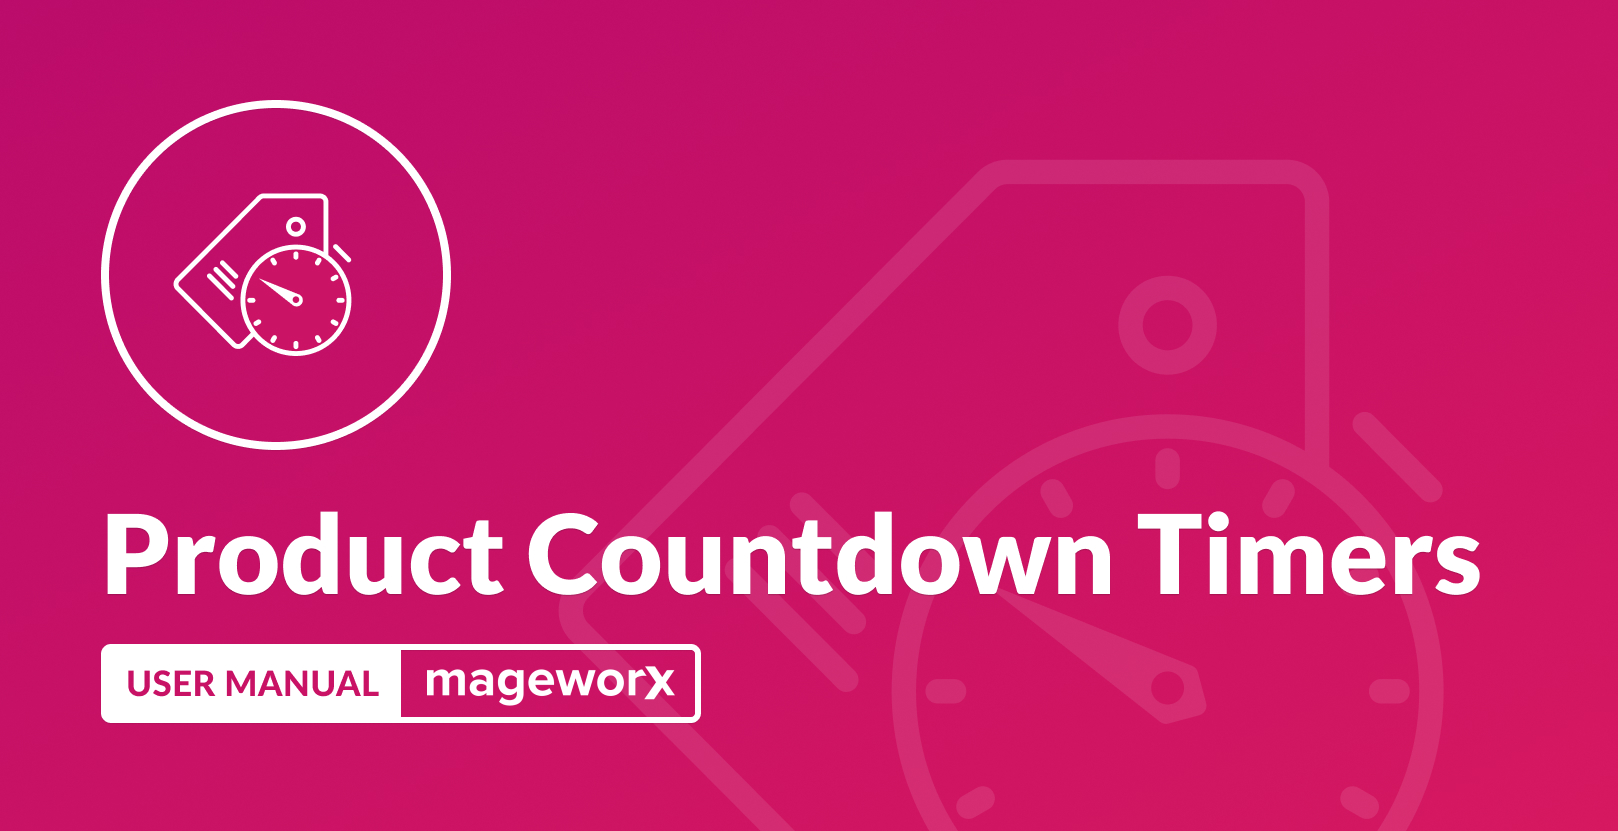 Product Countdown Timers